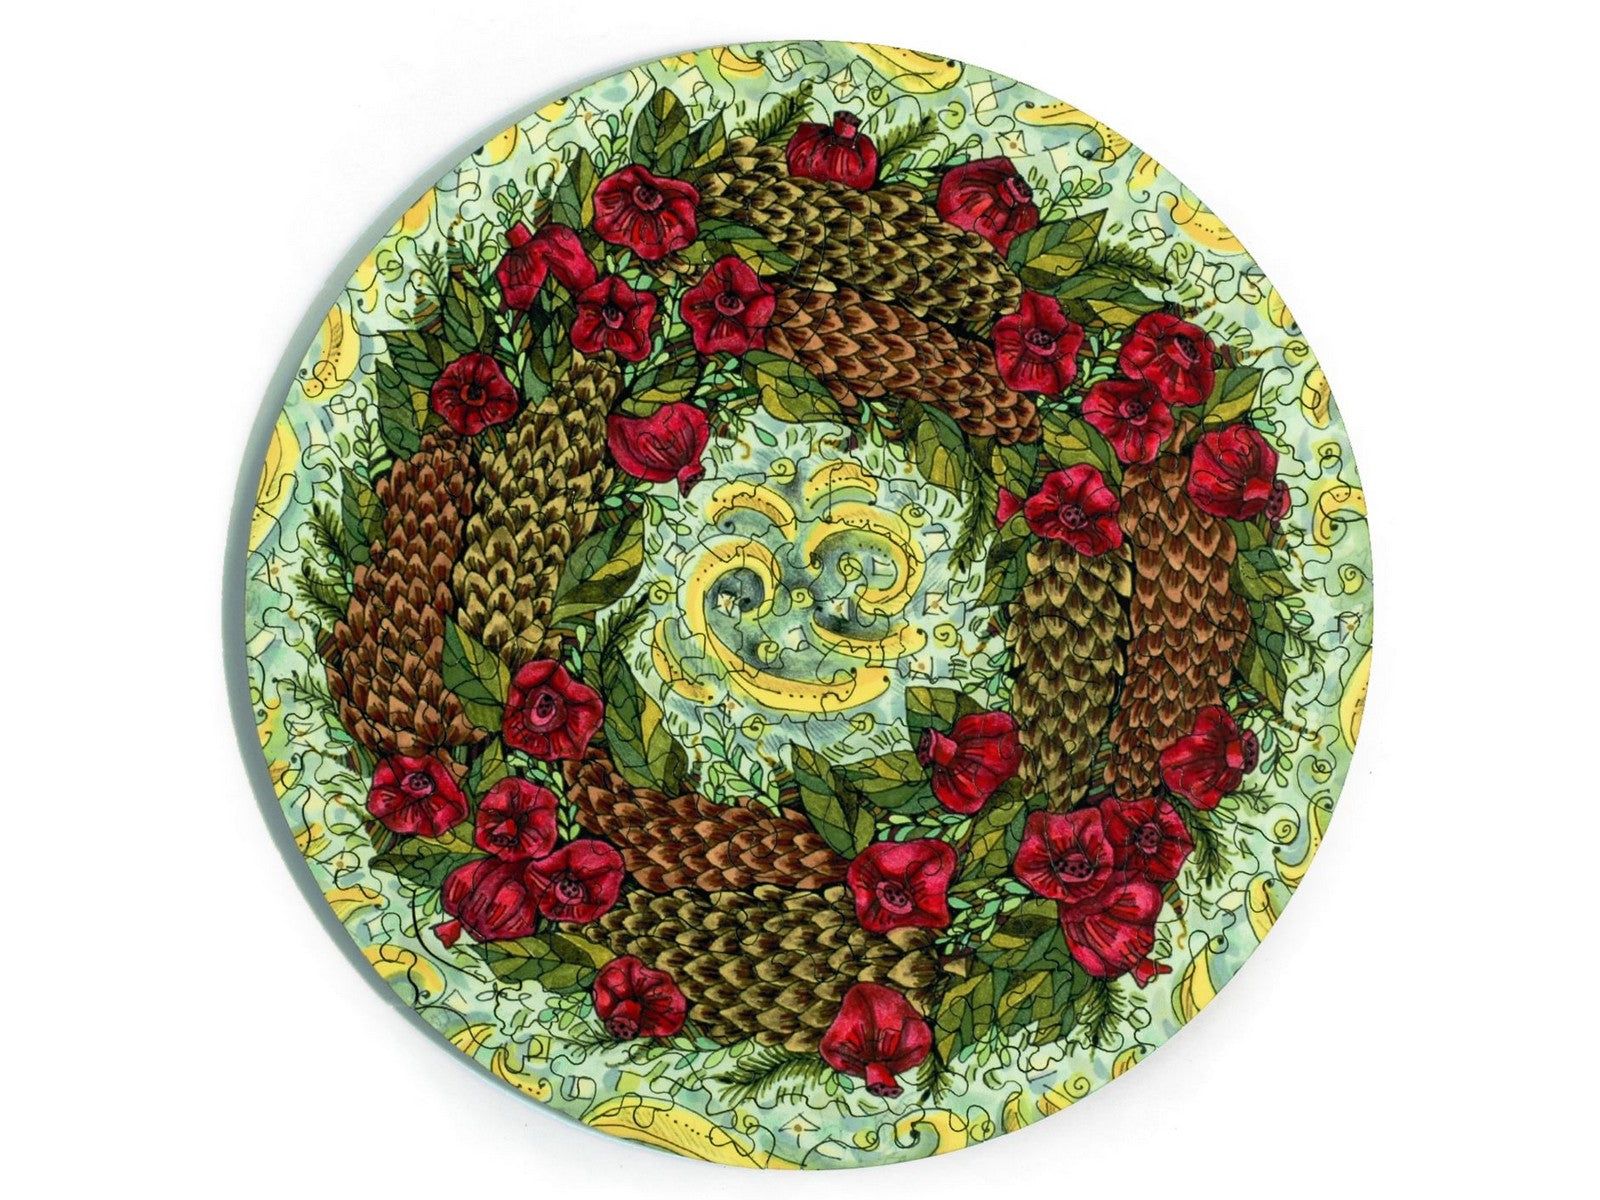 The front of the puzzle, Pinecone and Pomegranate Wreath, which shows a holiday wreath made of pinecones and pomegranates. 